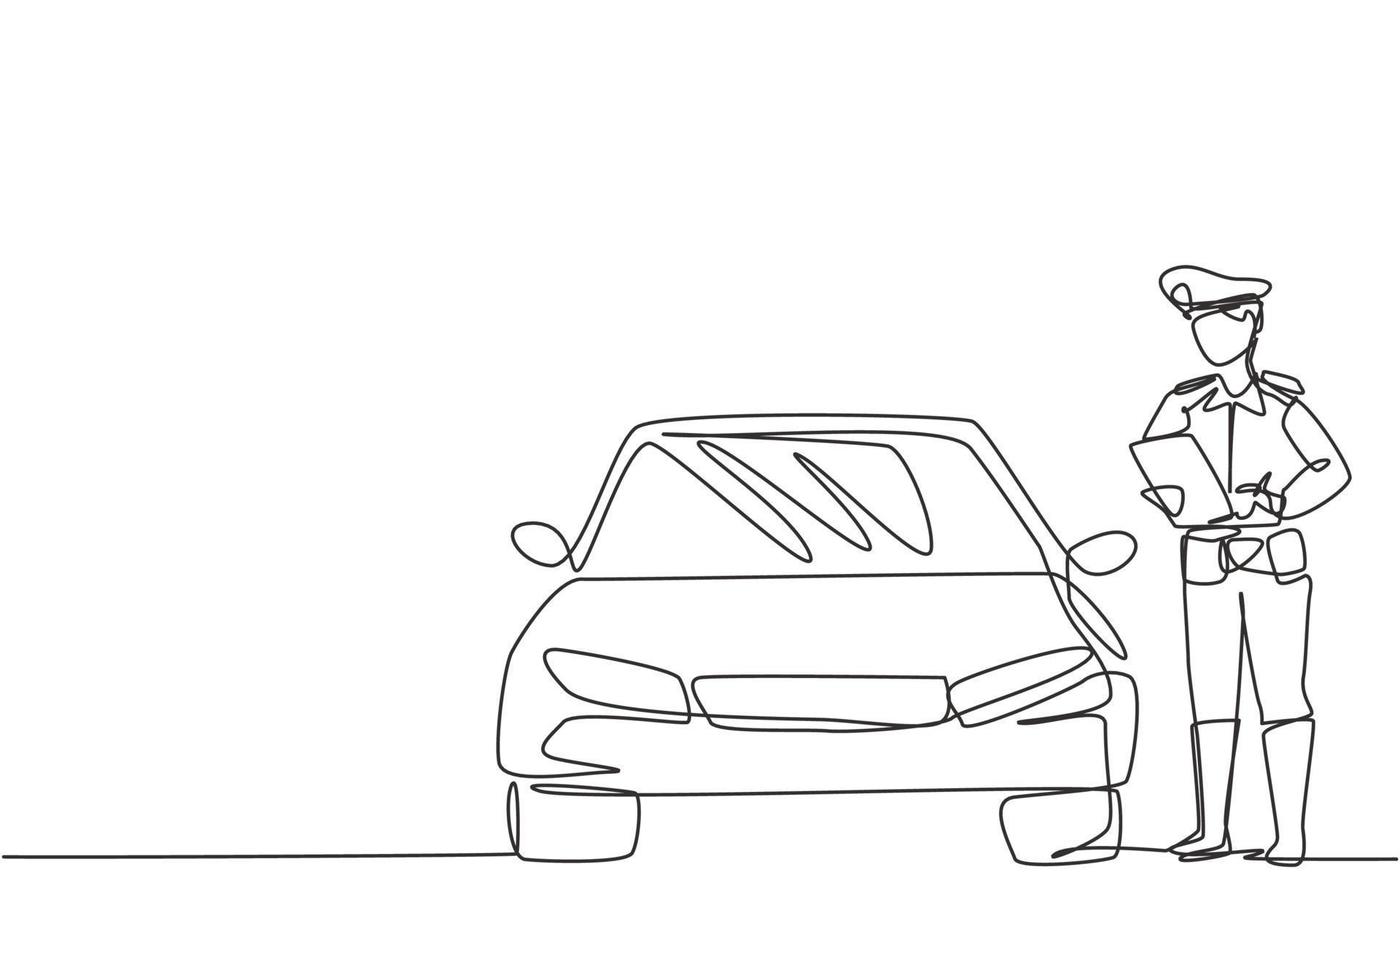 Single continuous line drawing policeman with uniform is ticketing a driver who uses a car for violating traffic signs. Regulations must be enforced. One line draw graphic design vector illustration.